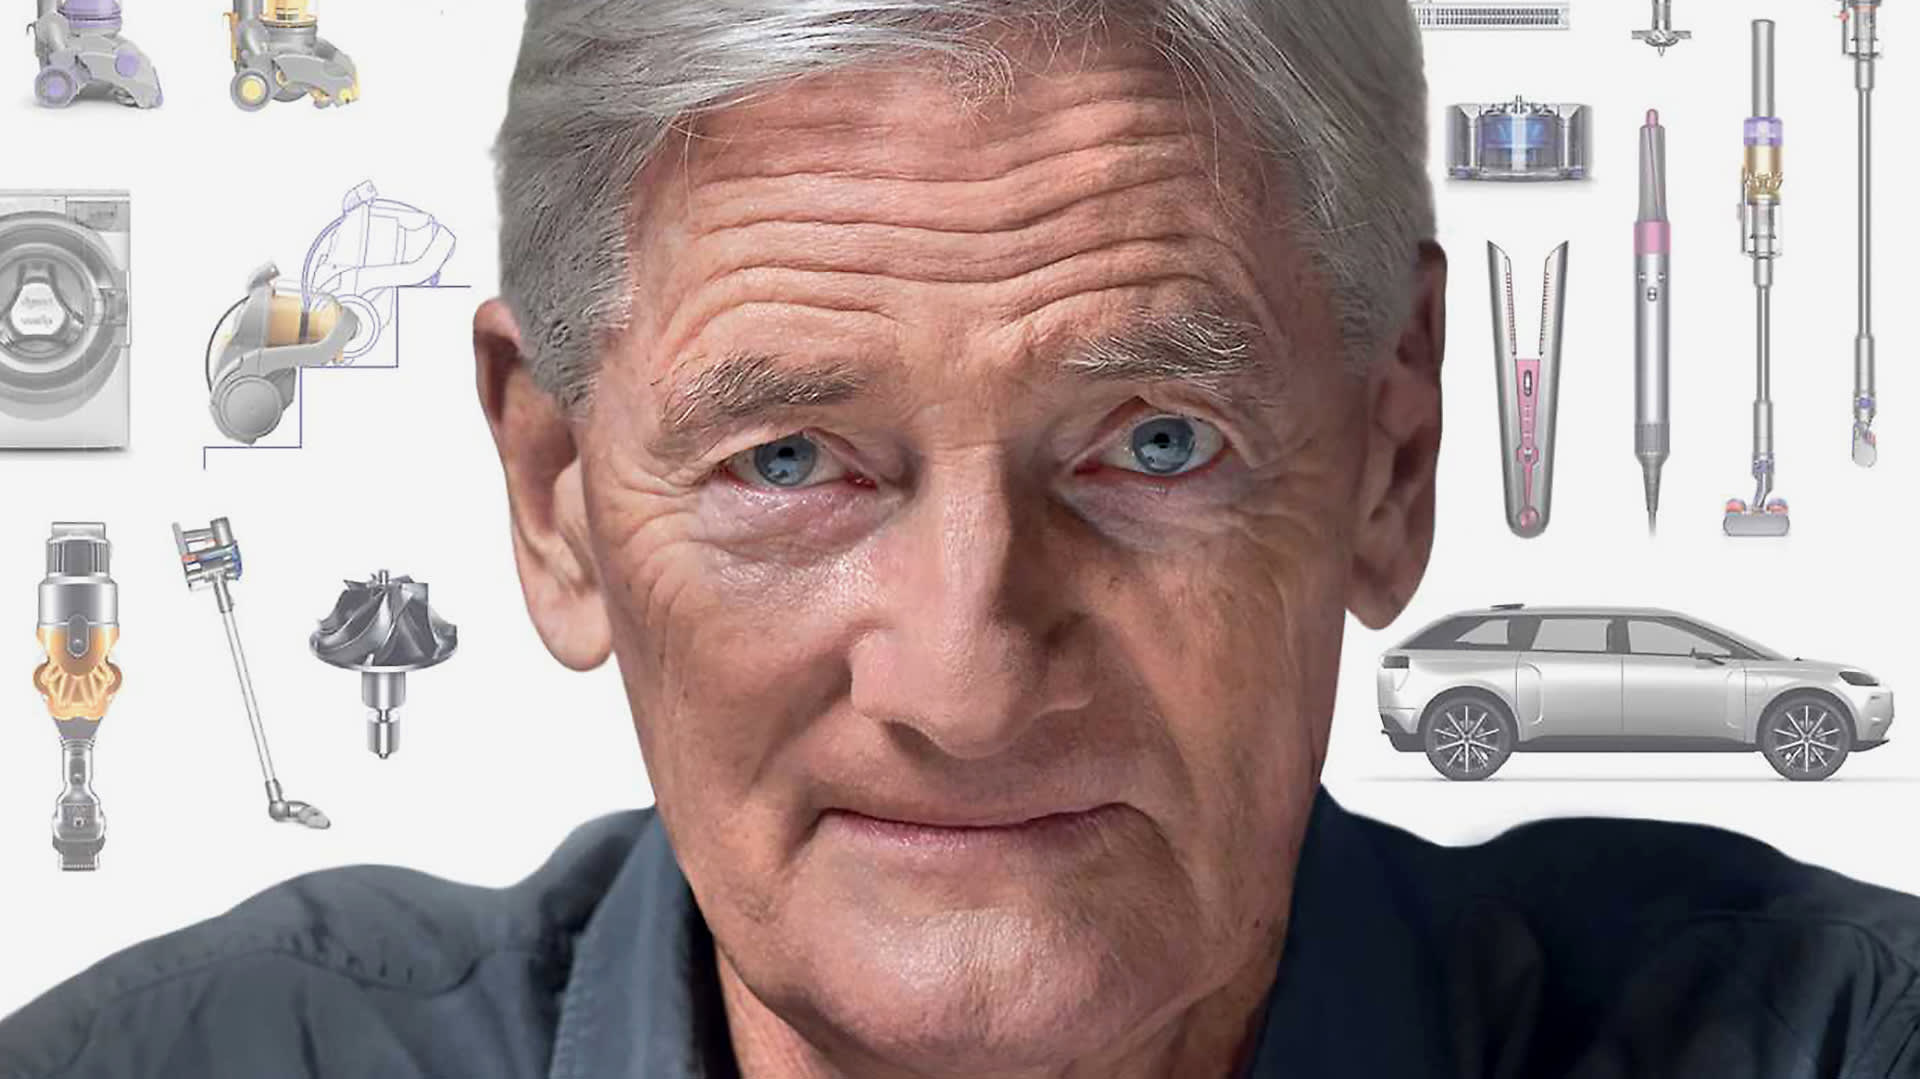 The inside story of Dyson’s $700 million quest to design an electric car